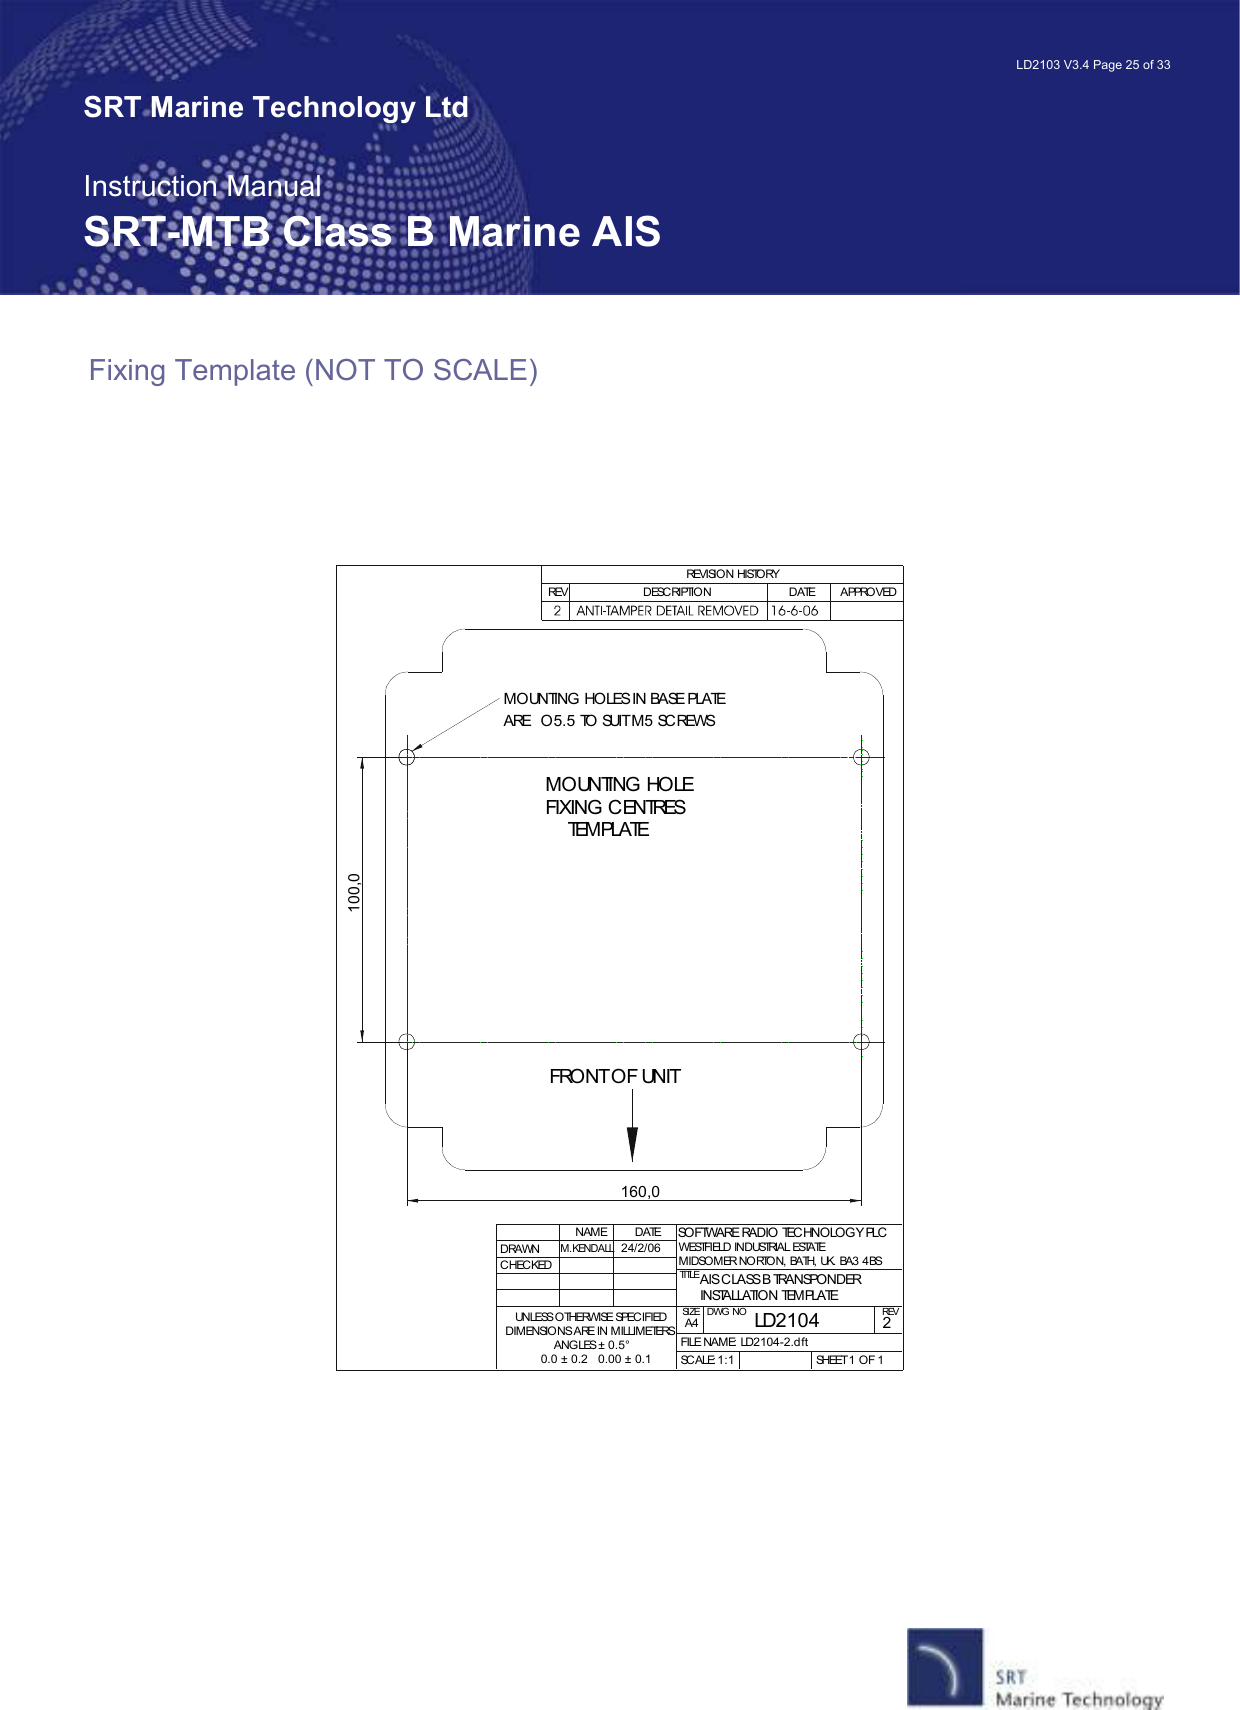   LD2103 V3.4 Page 25 of 33 SRT Marine Technology Ltd  Instruction Manual SRT-MTB Class B Marine AIS Fixing Template (NOT TO SCALE)    MOUNTING HOLE FIXING CENTRES    TEMPLATEMOUNTING HOLES IN BASE PLATE ARE  O5.5 TO SUIT M5 SCREWSFRONT OF UNIT100,0160,0DRAWNCHECKEDNAMEM.KENDALLDATETITLESIZEA4DWG NO REVFILE NAME: LD2104-2.dftSCALE: SHEET 1 OF 1REVISION HISTORYREV DESCRIPTION DATE APPROVEDSOFTWARE RADIO TECHNOLOGY PLCWESTFIELD INDUSTRIAL ESTATEMIDSOMER NORTON, BATH, UK. BA3 4BSUNLESS OTHERWISE SPECIFIEDDIMENSIONS ARE IN MILLIMETERSANGLES ± 0.5°0.0 ± 0.2   0.00 ± 0.124/2/06LD21042AIS CLASS B TRANSPONDERINSTALLATION TEMPLATE1:1 